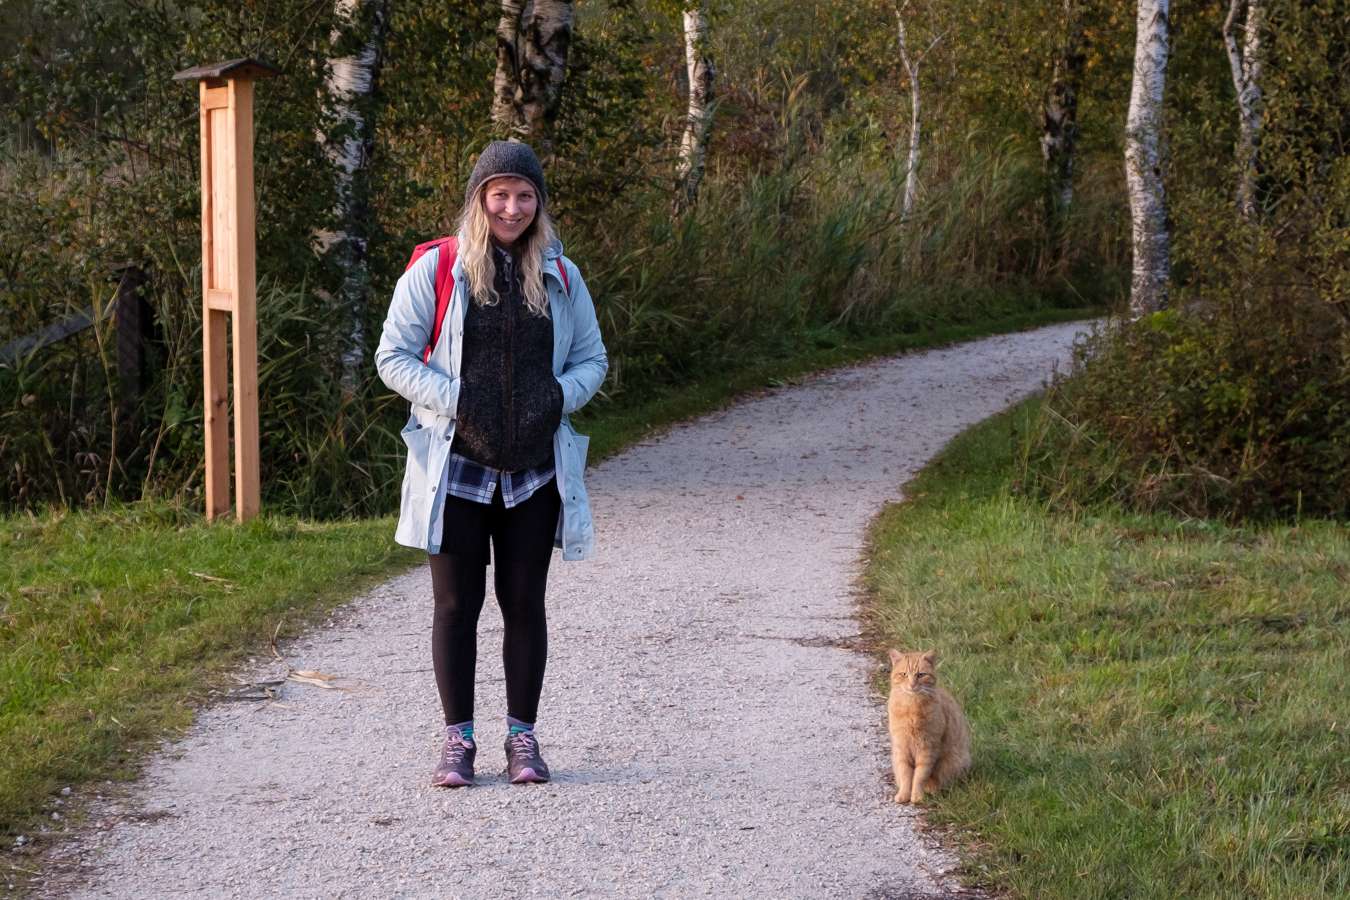 Caroline standing side by side with the cat who walked around Wolfgangsee with us